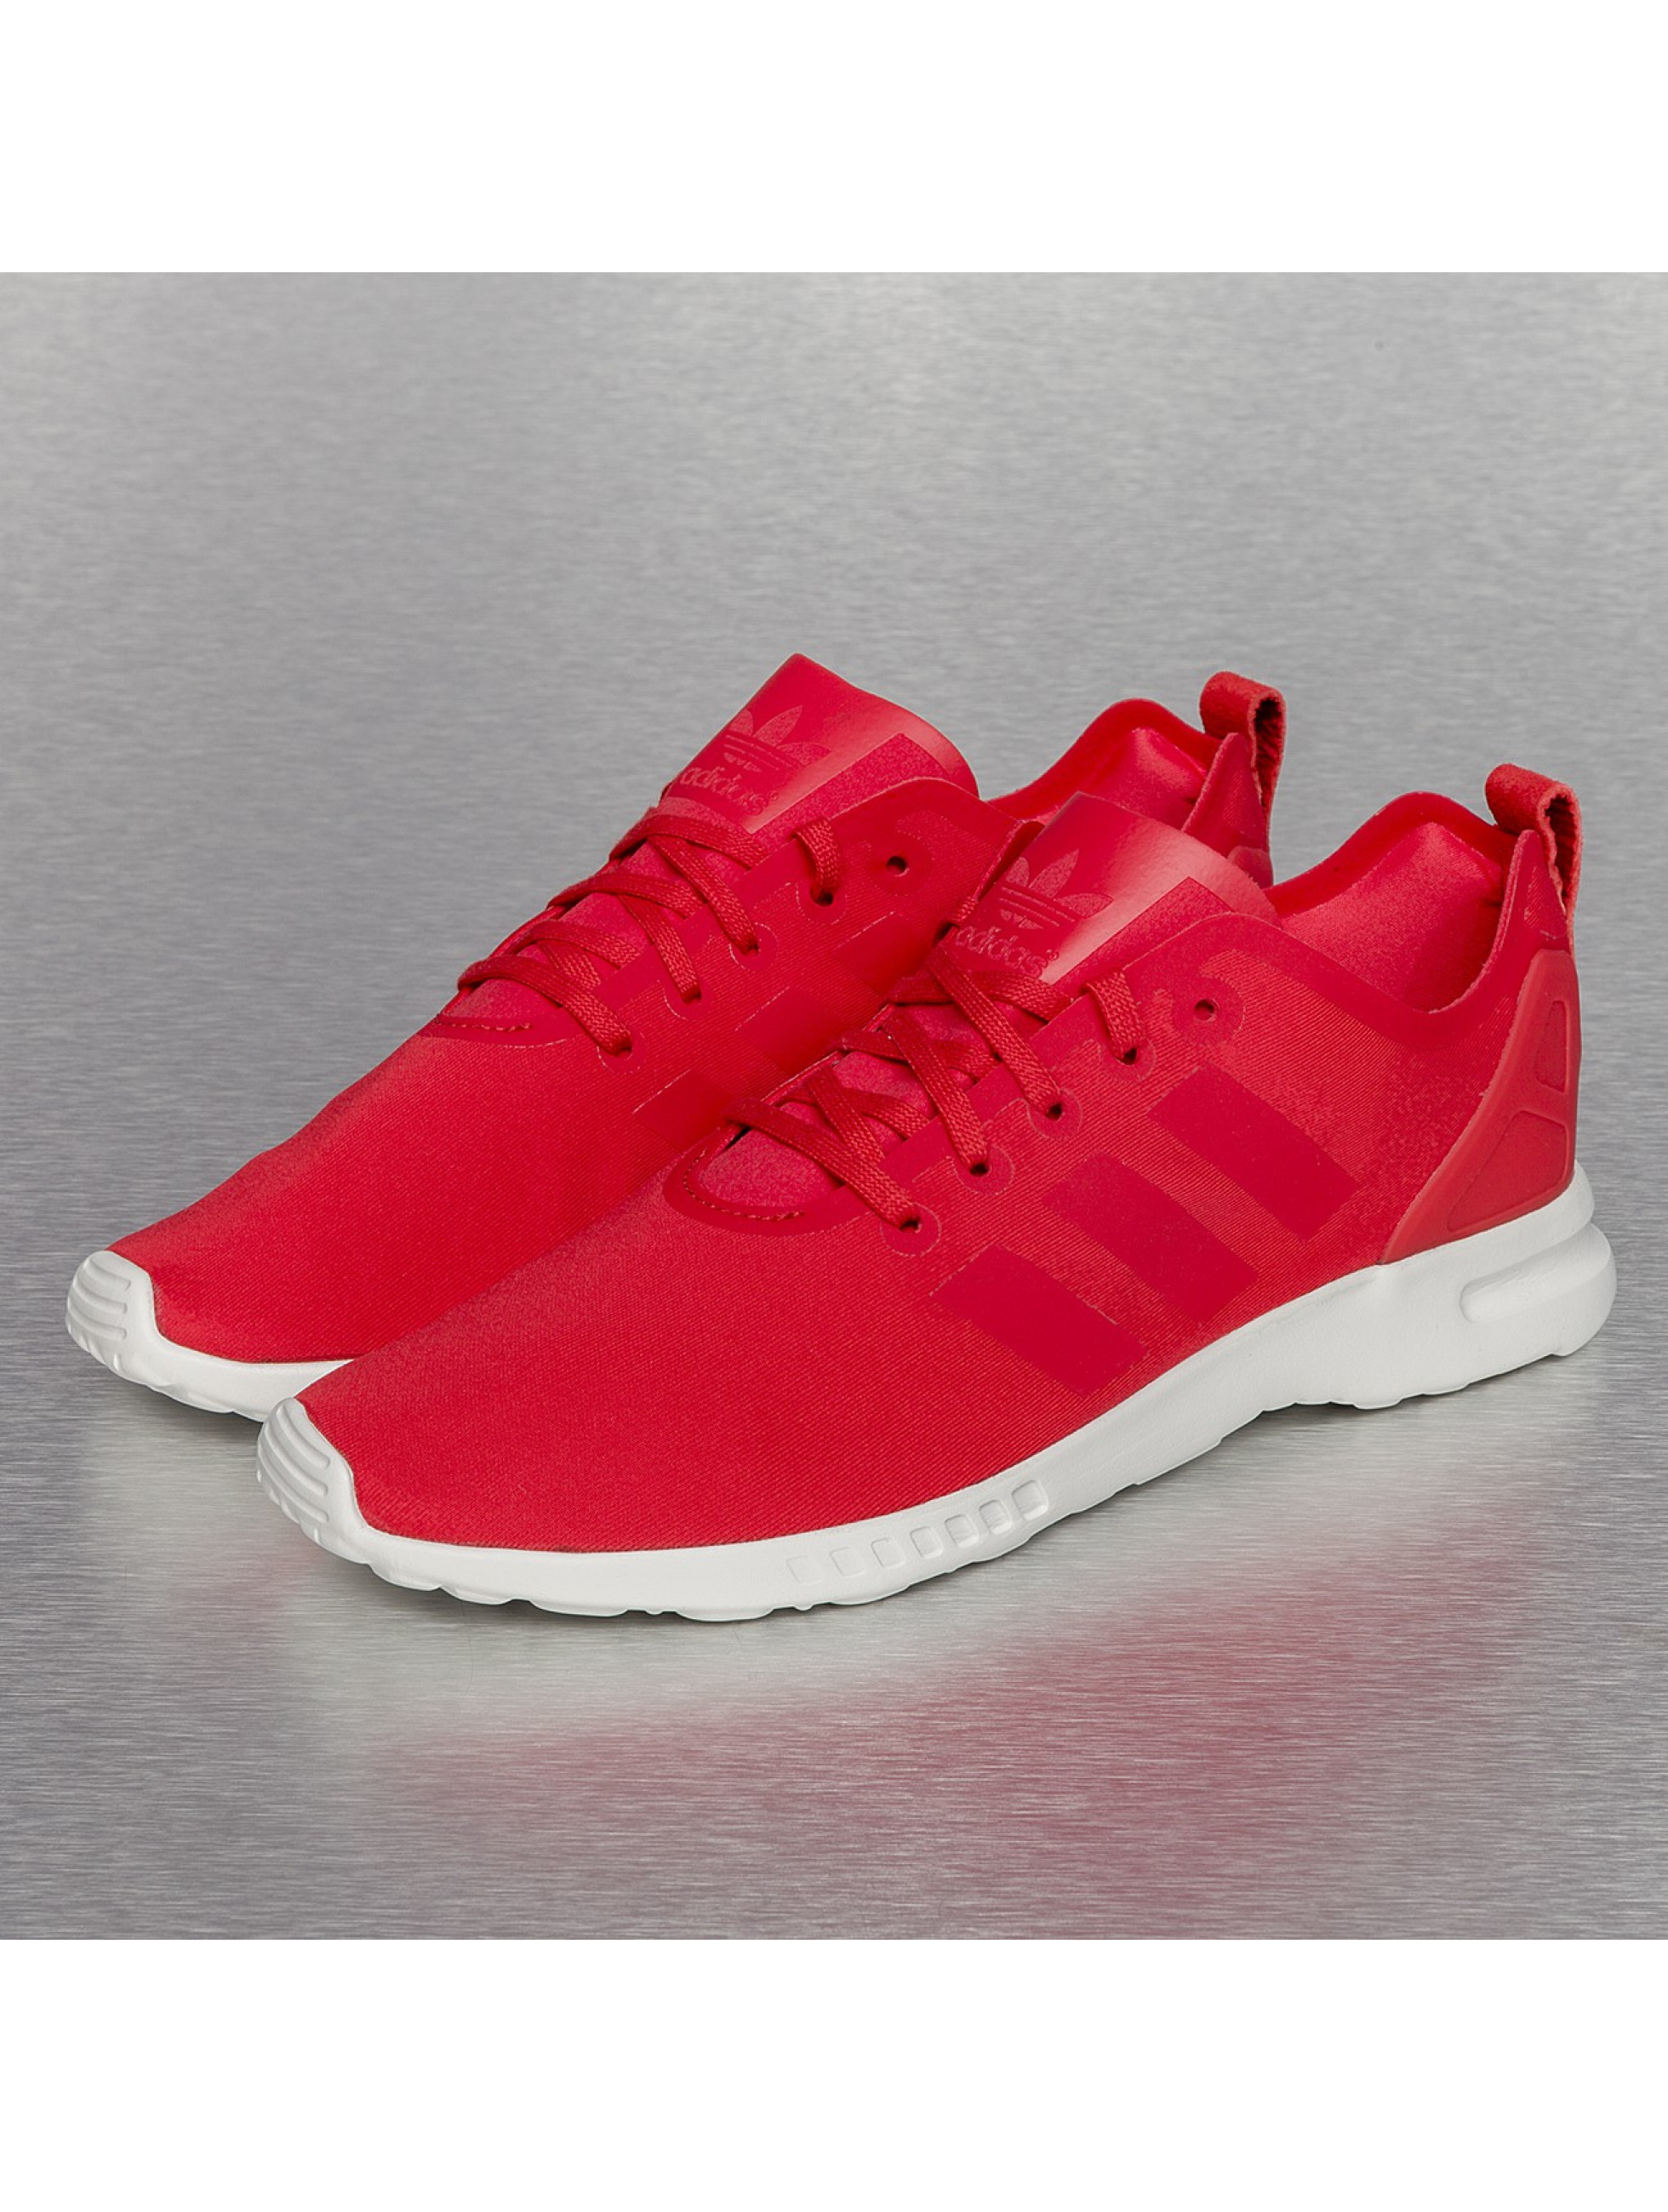 adidas Chaussures / Baskets ZX Flux ADV Smooth en rouge